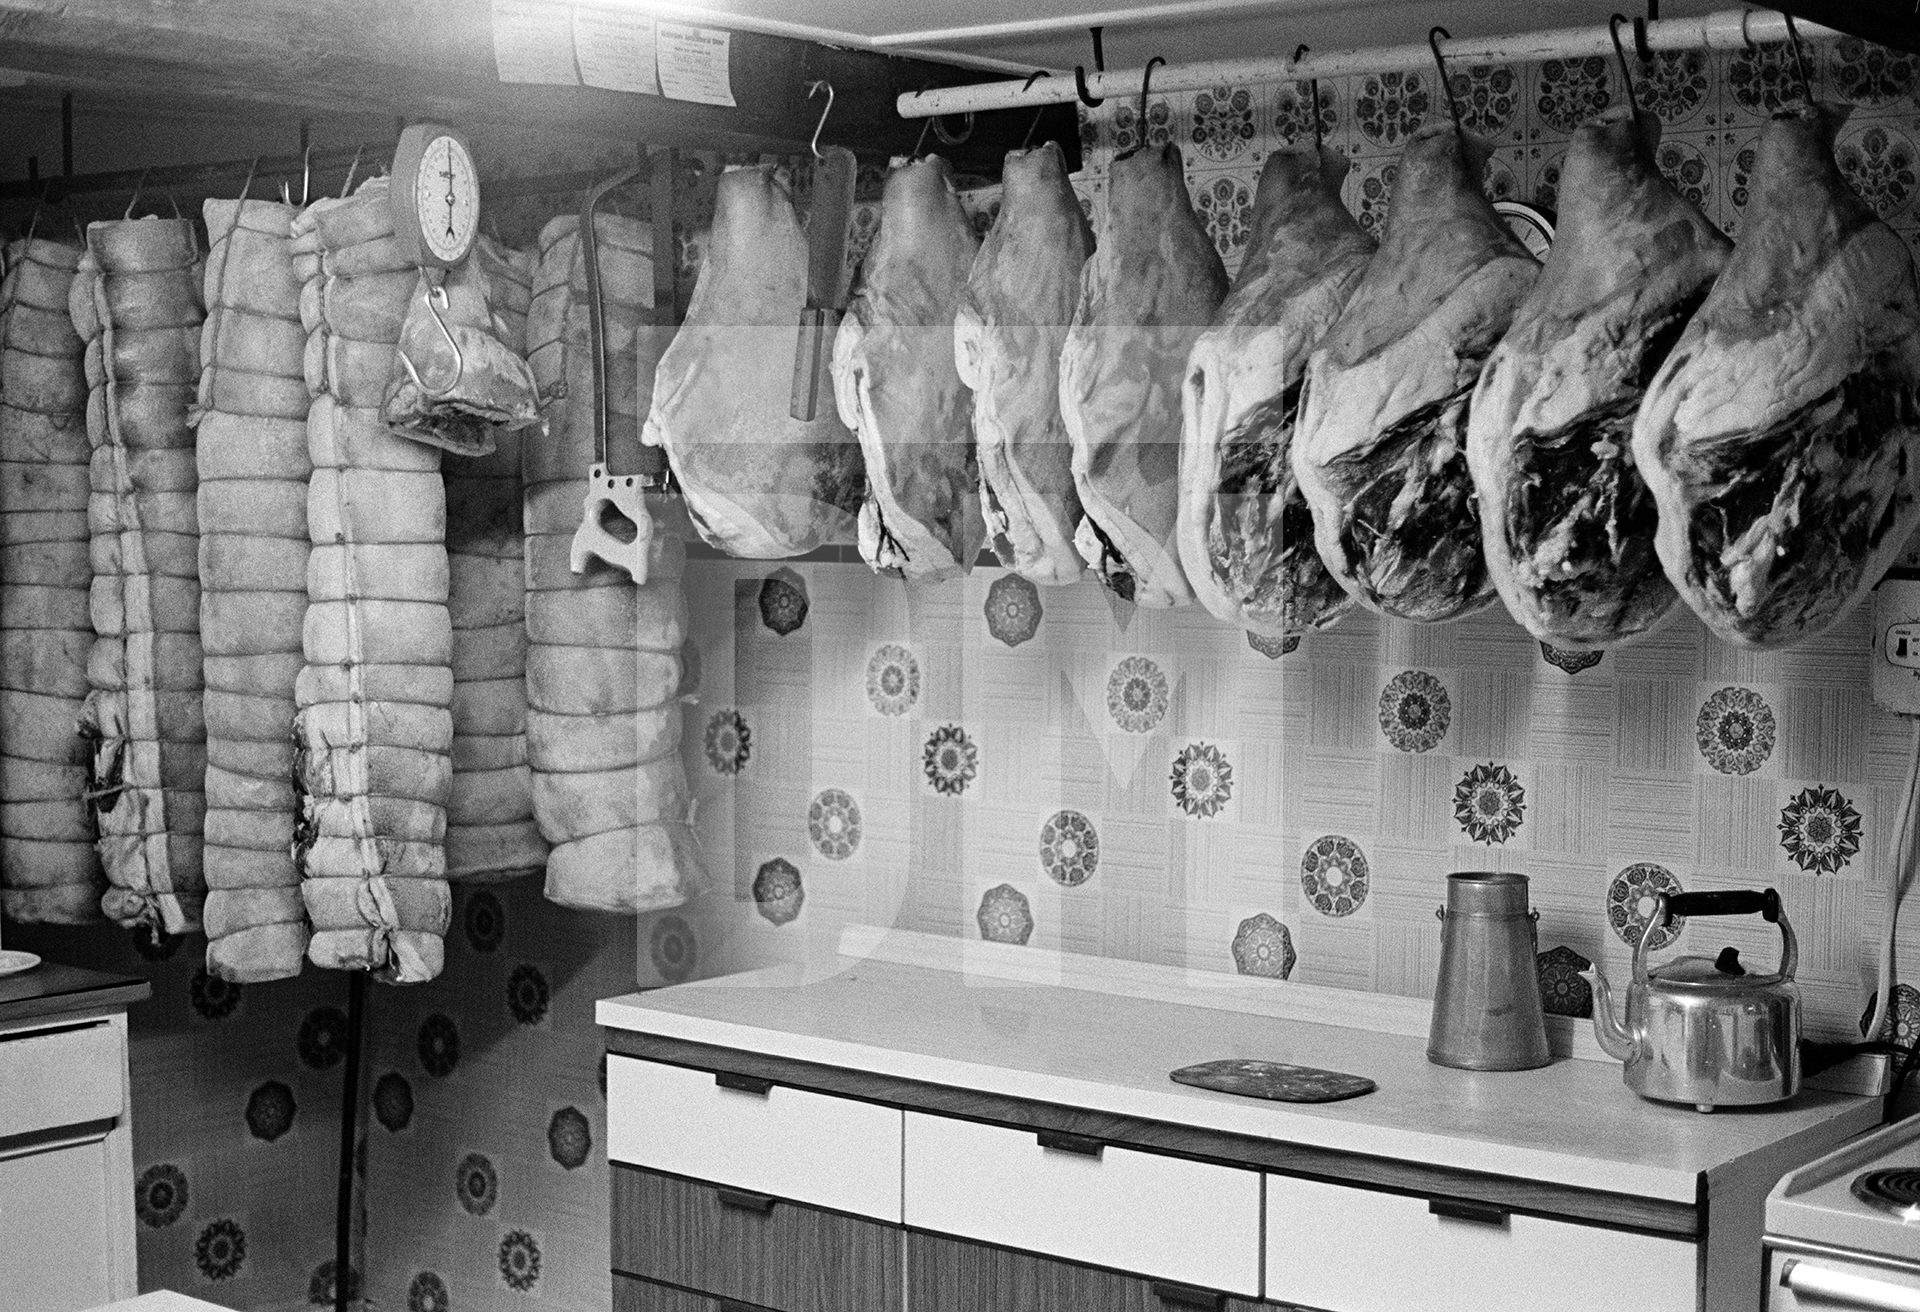 Rolls of bacon and hams hang in the farmhouse kitchen. North Yorkshire 1976 by Daniel Meadows